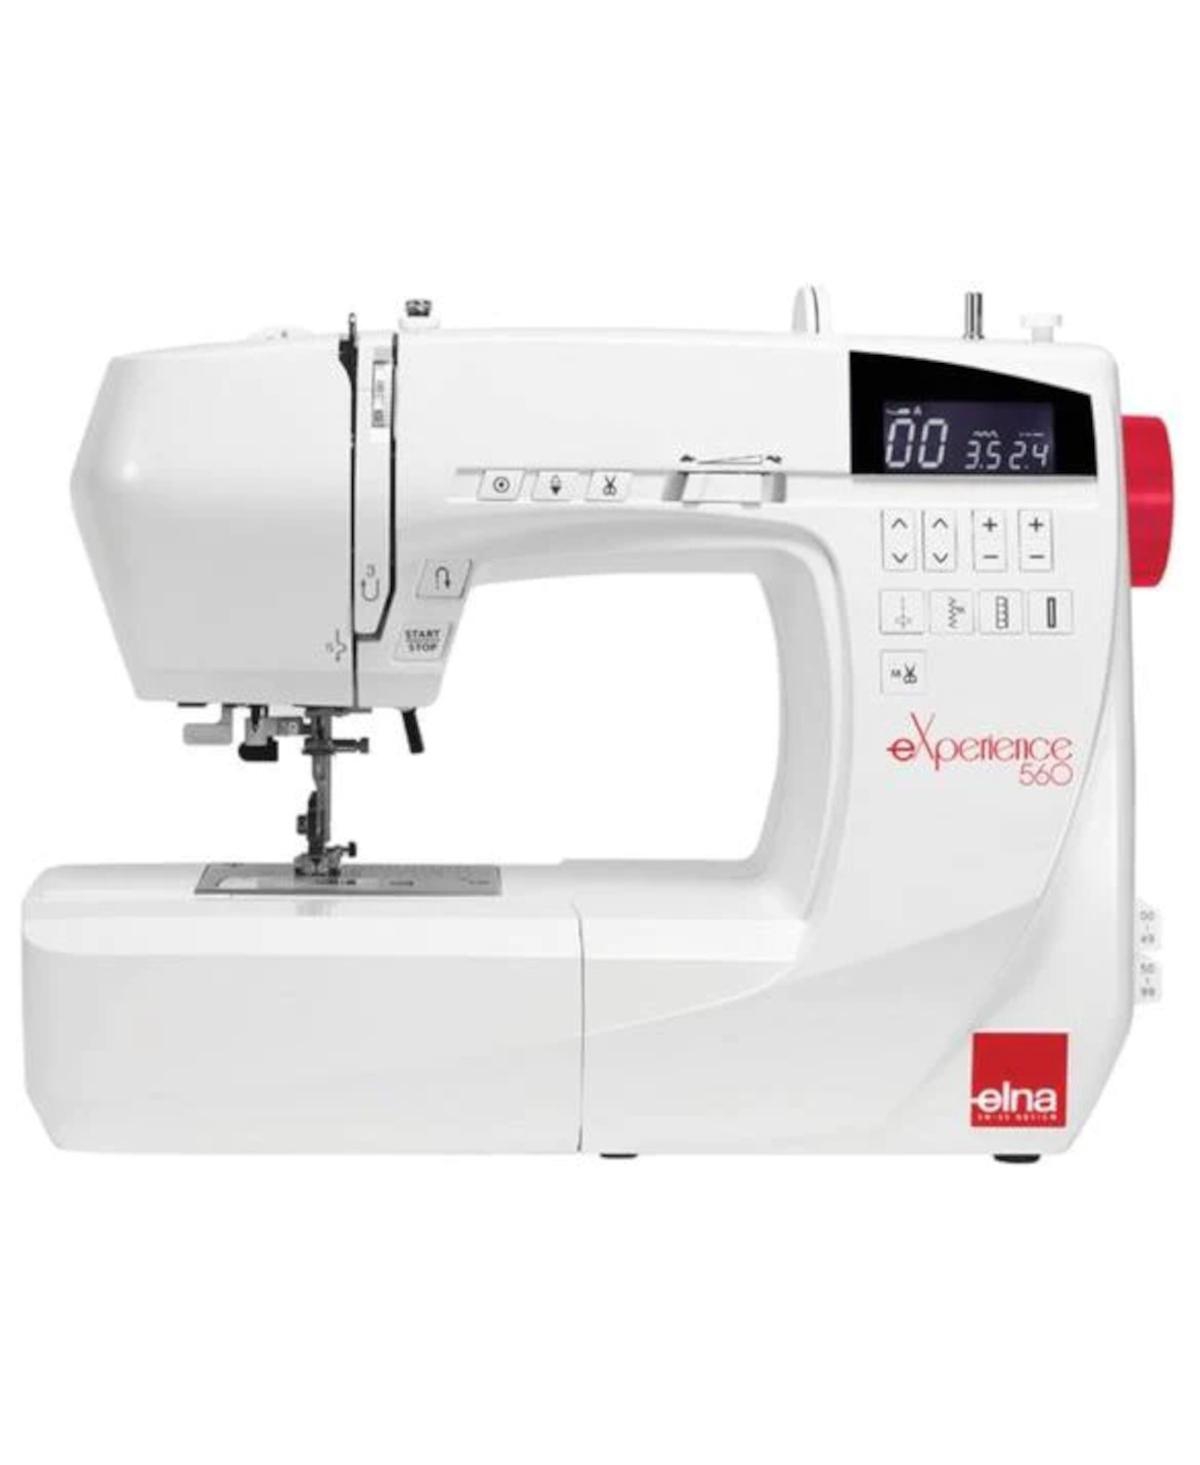 eXperience 560 Sewing Machine - White